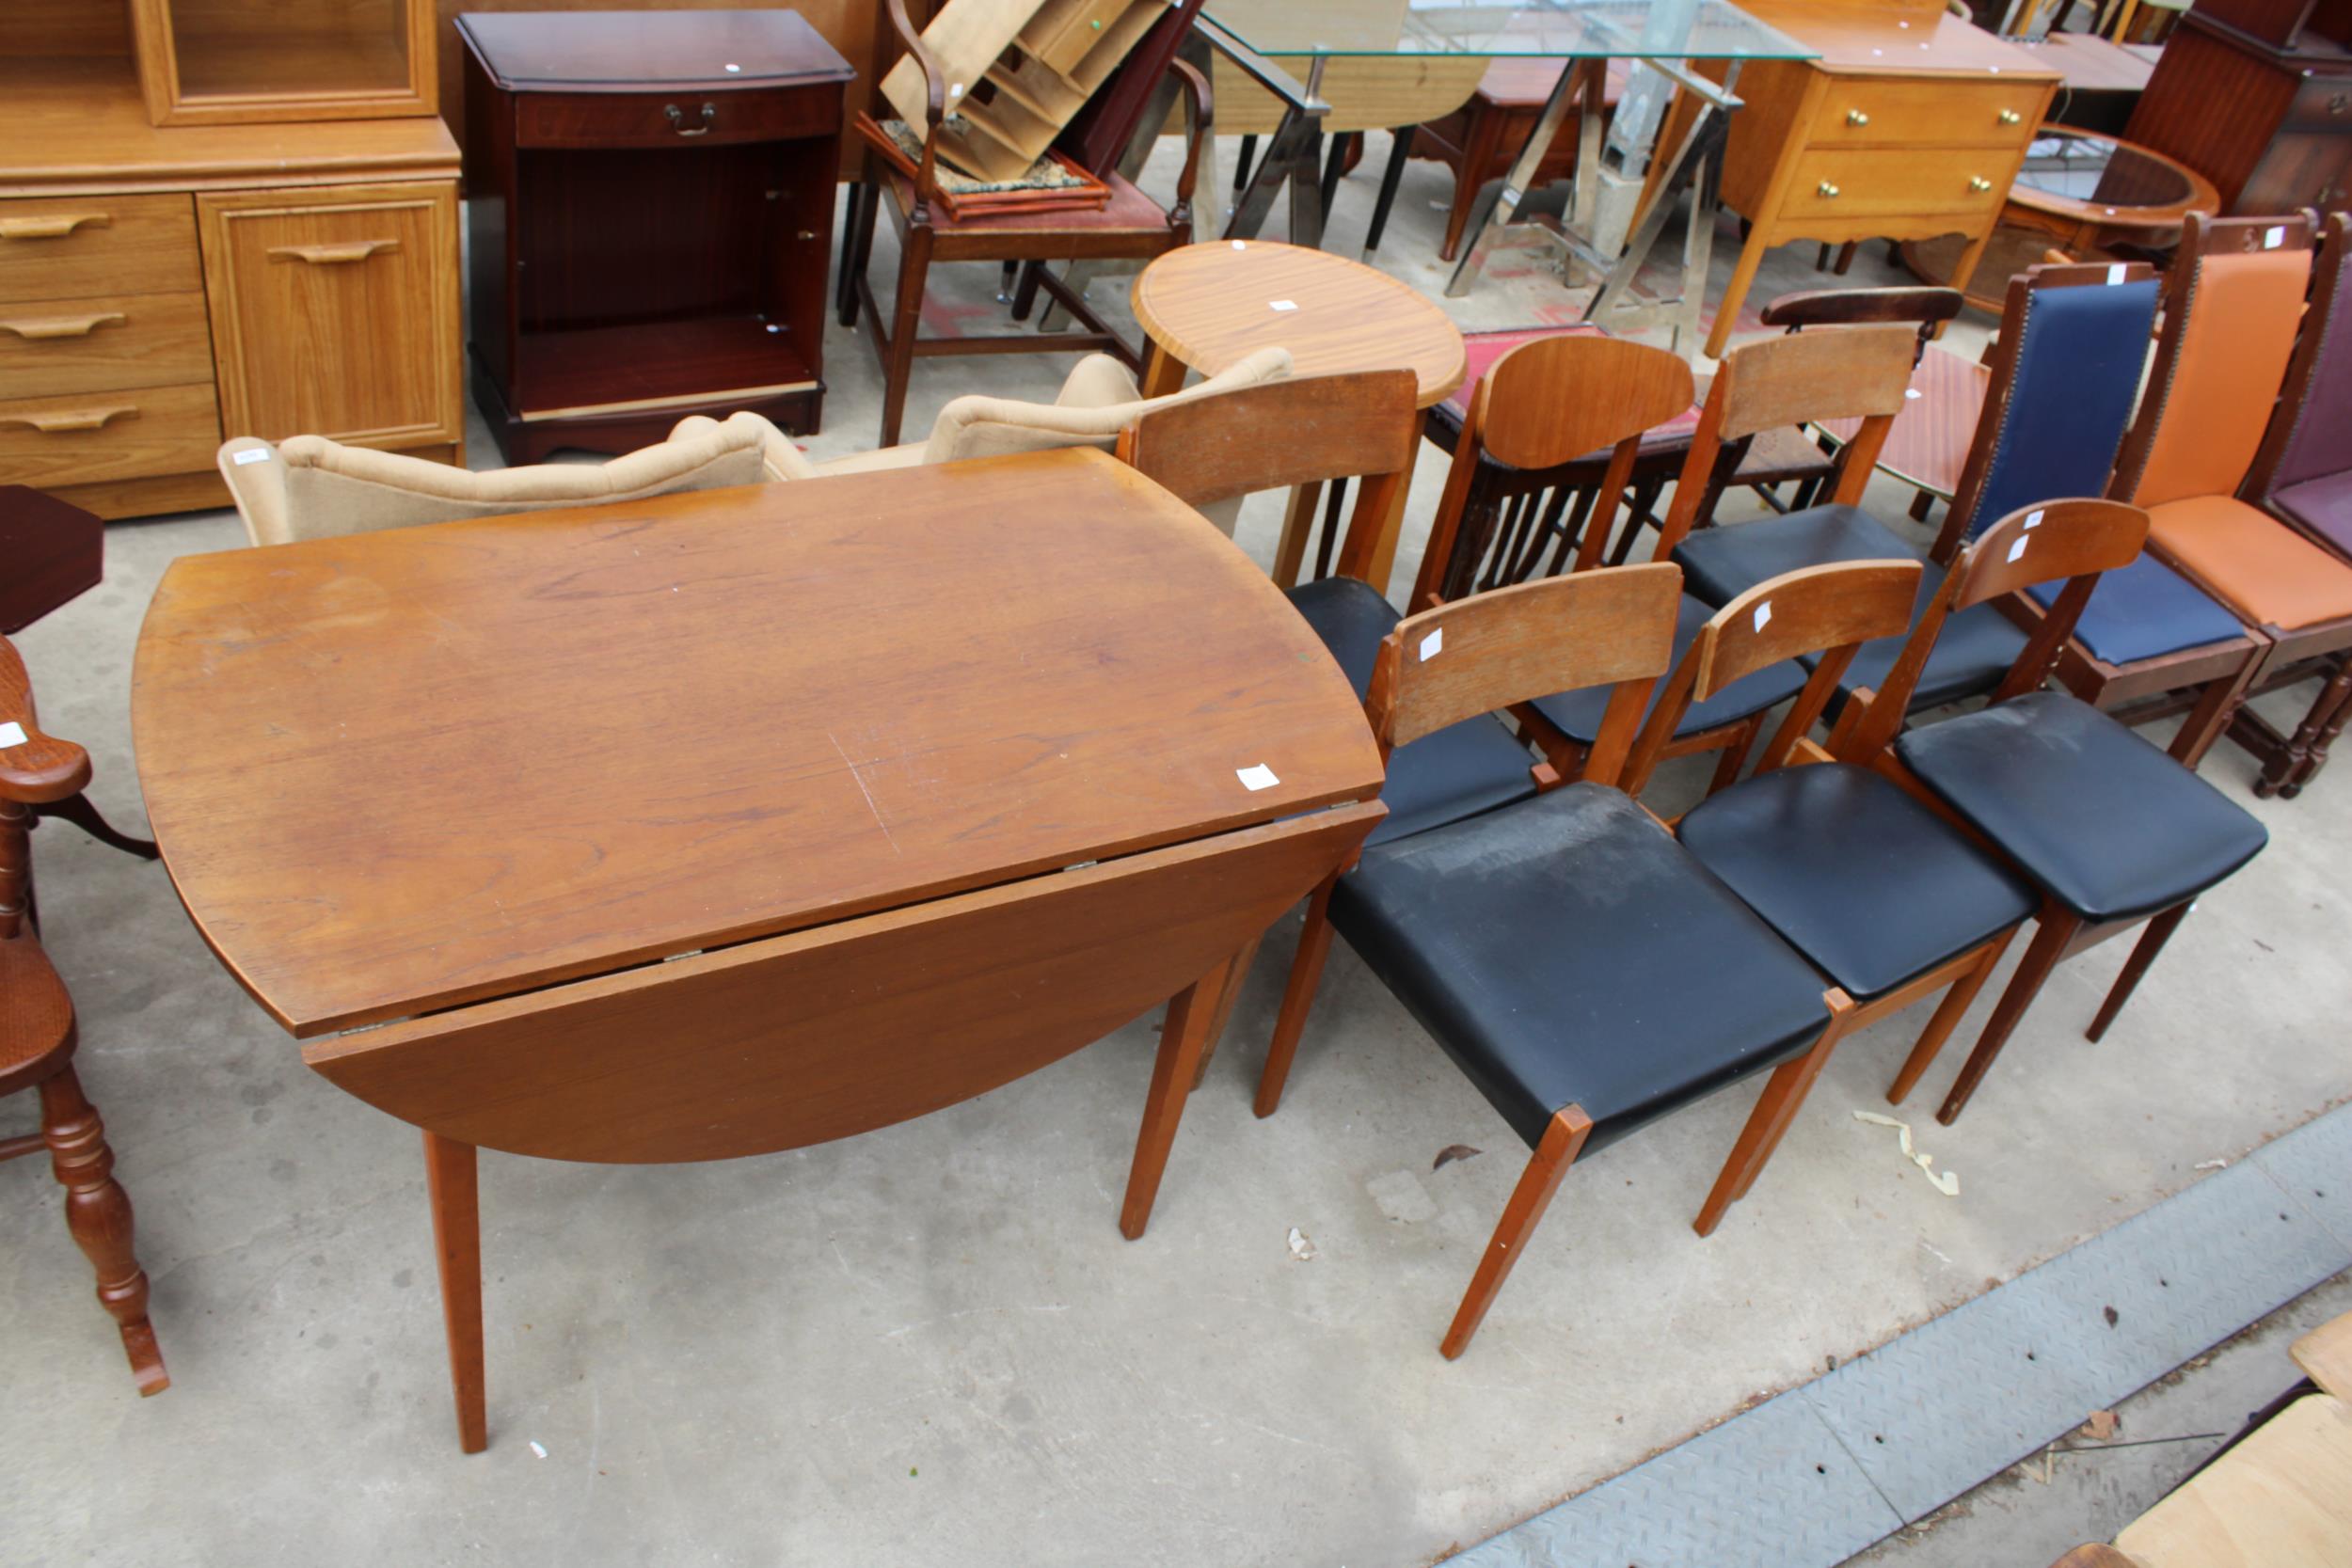 SIX VARIOUS RETRO TEAK DINING CHAIRS AND RETRO TEAK OVAL DROP-LEAF DINING TABLE, 49" X 45" OPENED